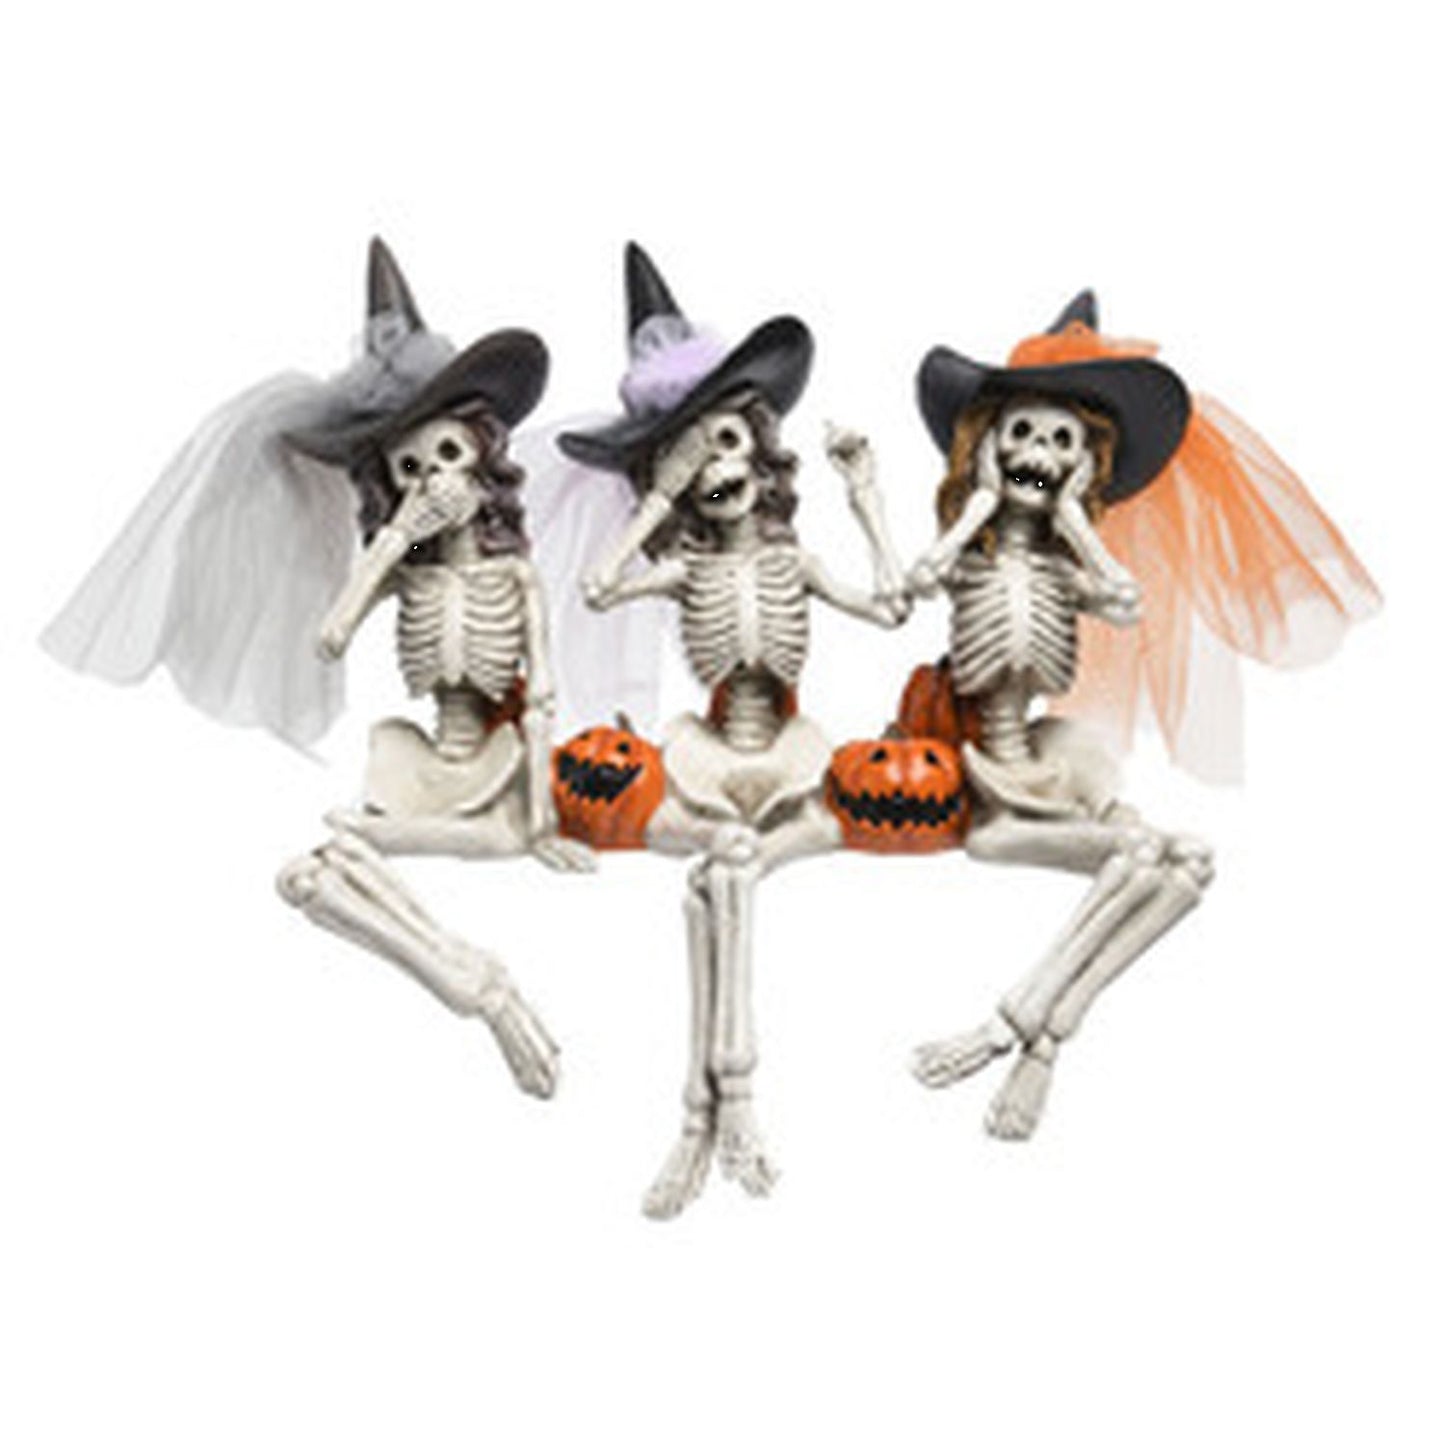 Candy Corn Halloween Set Of 3 Skeleton Witches Sitting Figurines, Brown